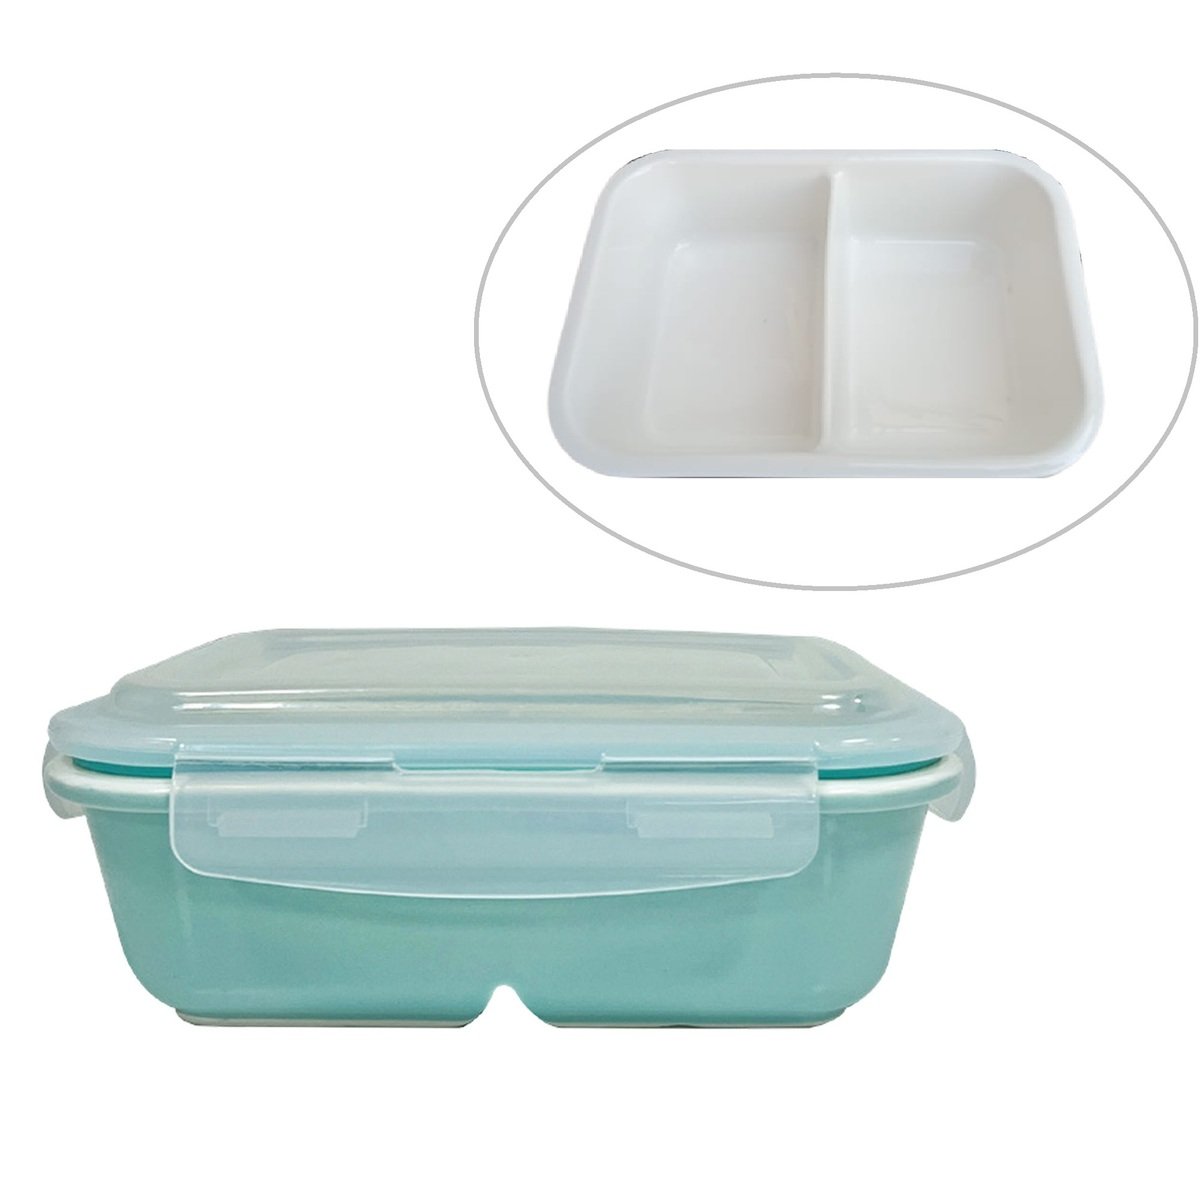 Home Ceramic Food Box With Lid 8.65 Inch 2041STK